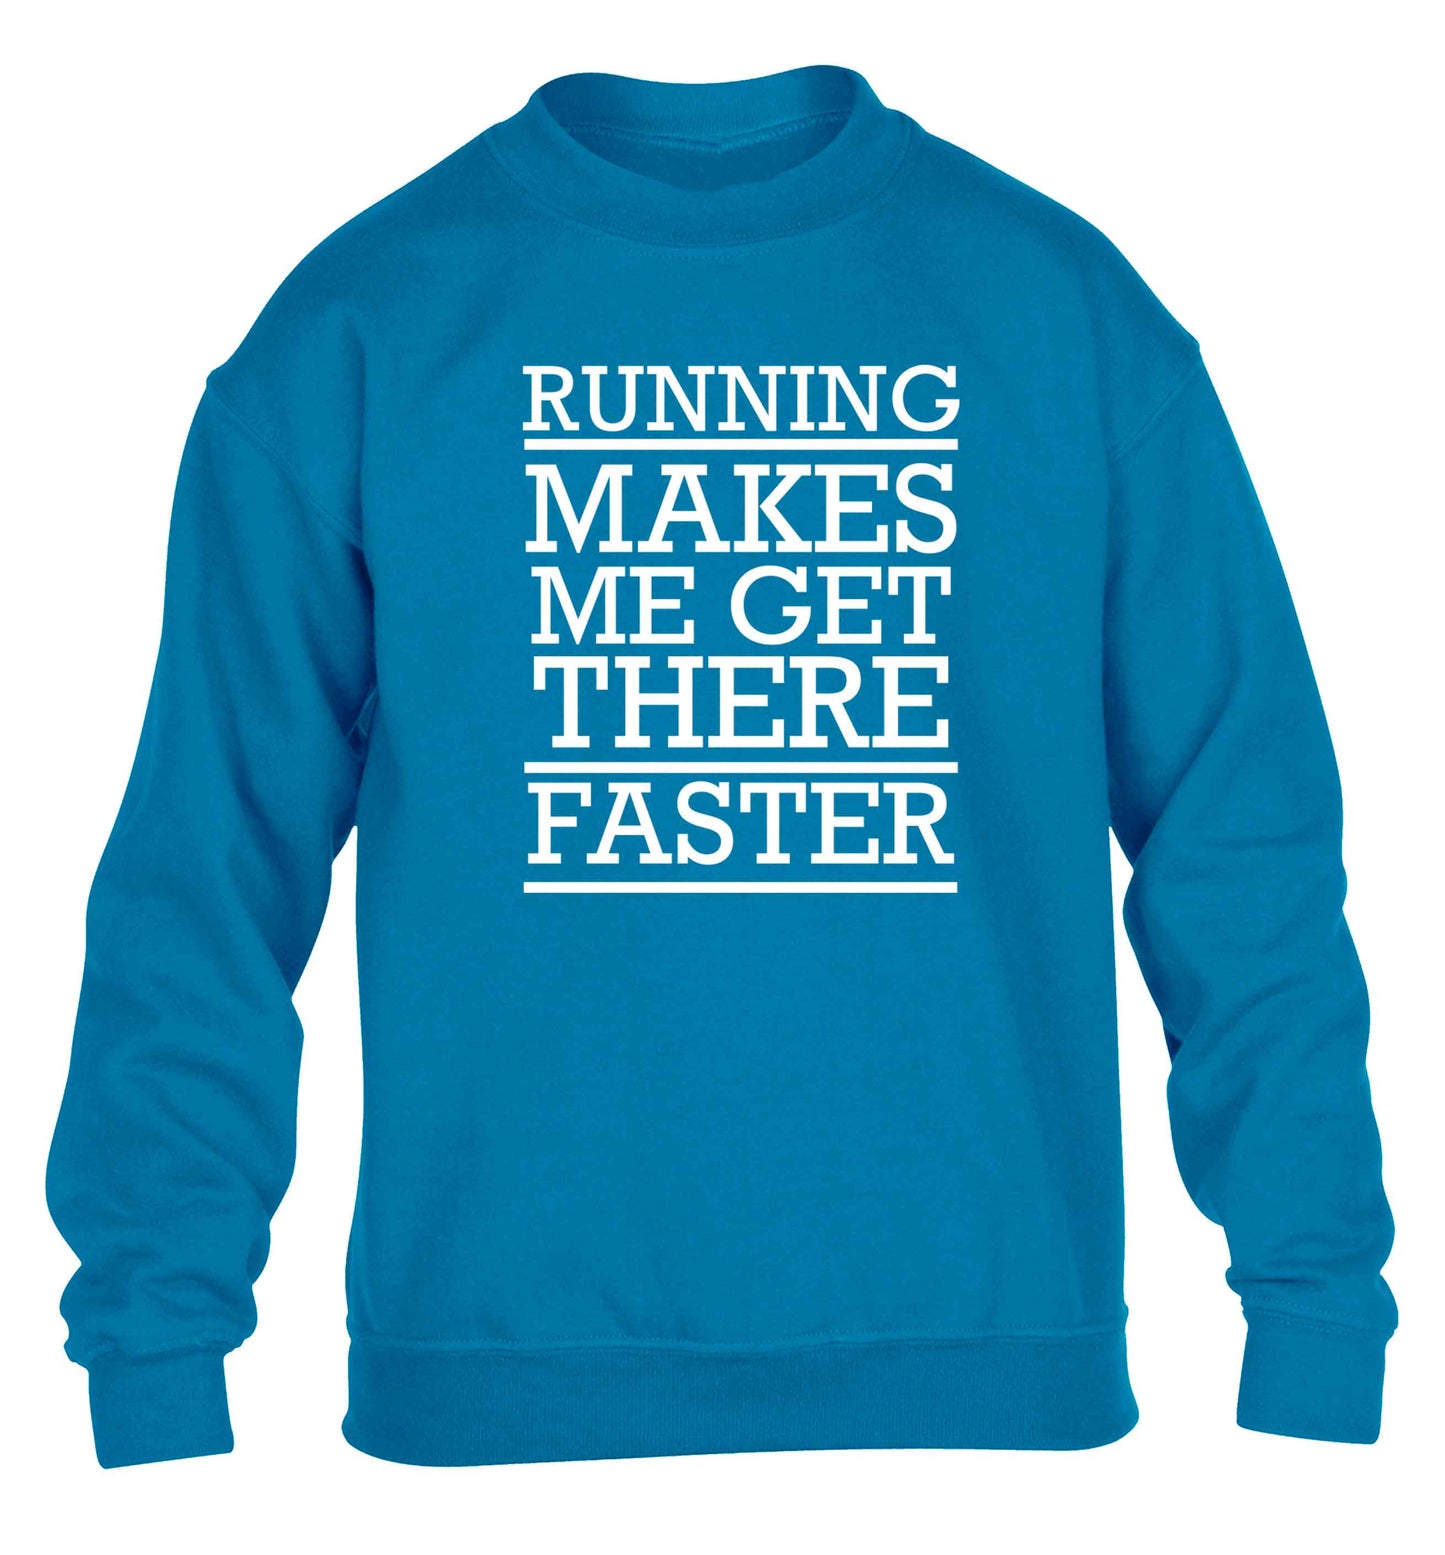 Running makes me get there faster children's blue sweater 12-13 Years